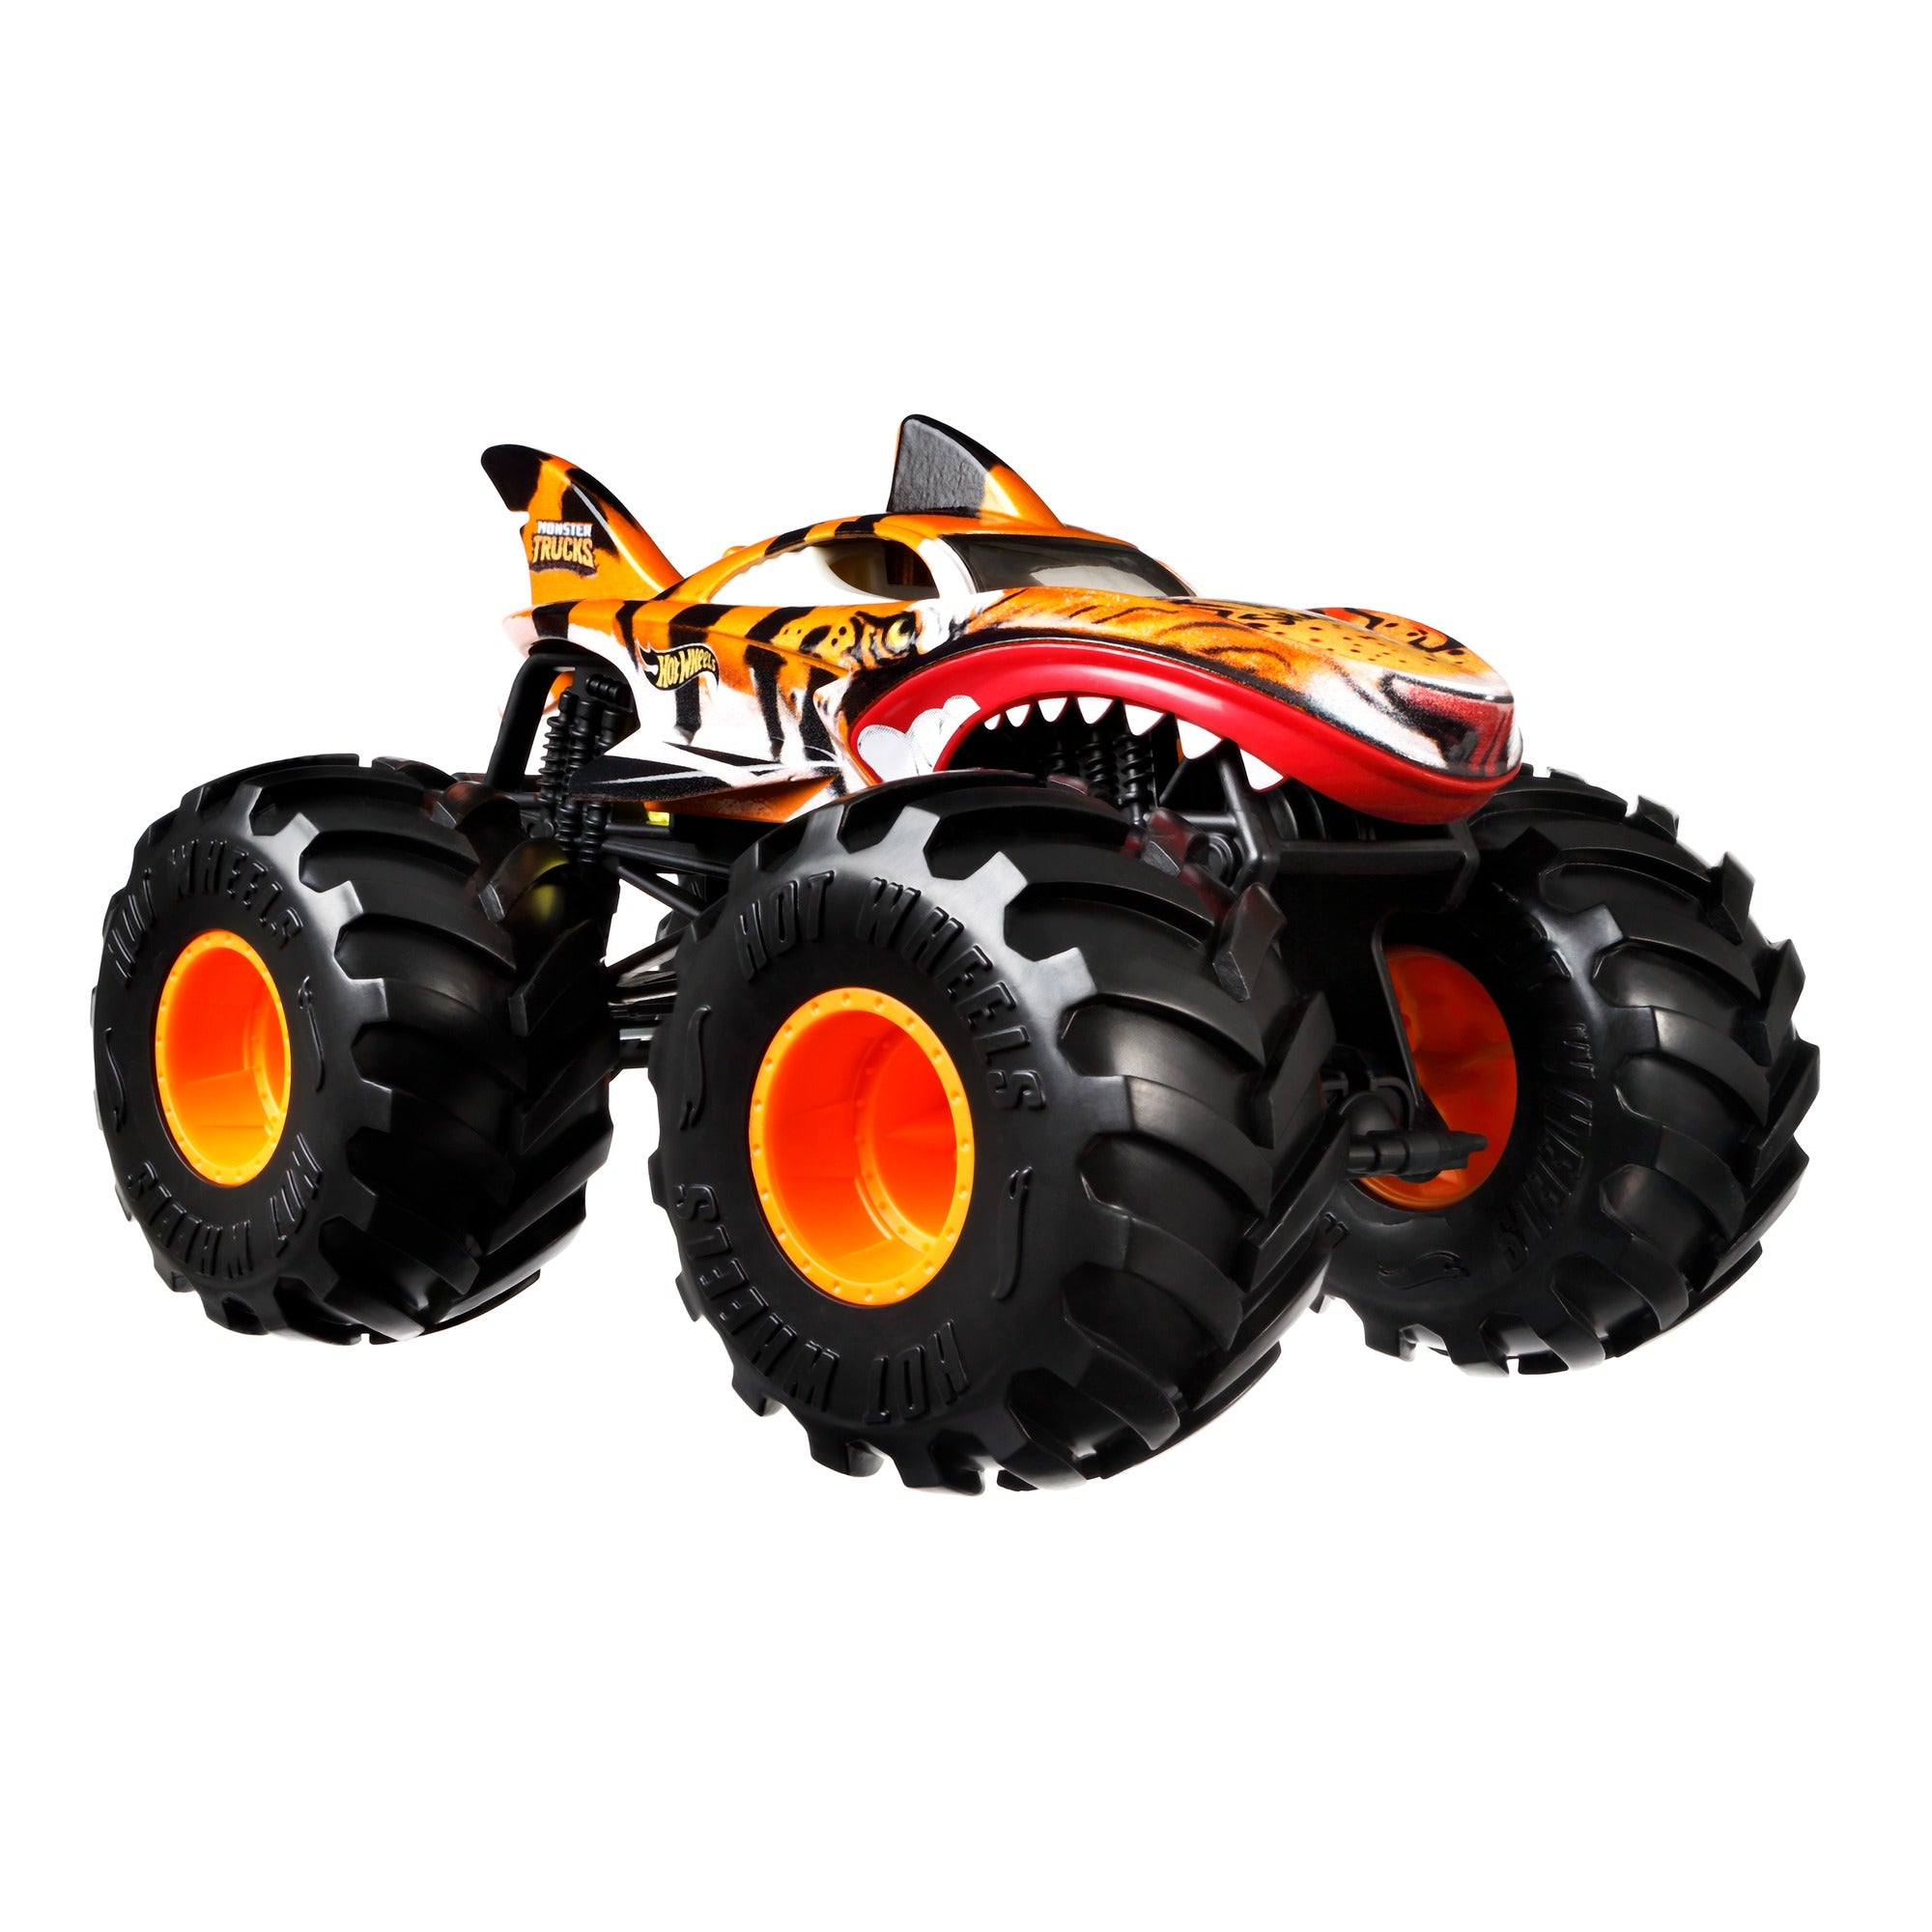 Hot Wheels 1:24 Scale Oversized Monster Truck Tiger Shark Die-Cast Toy Truck with Giant Wheels and Cool Designs